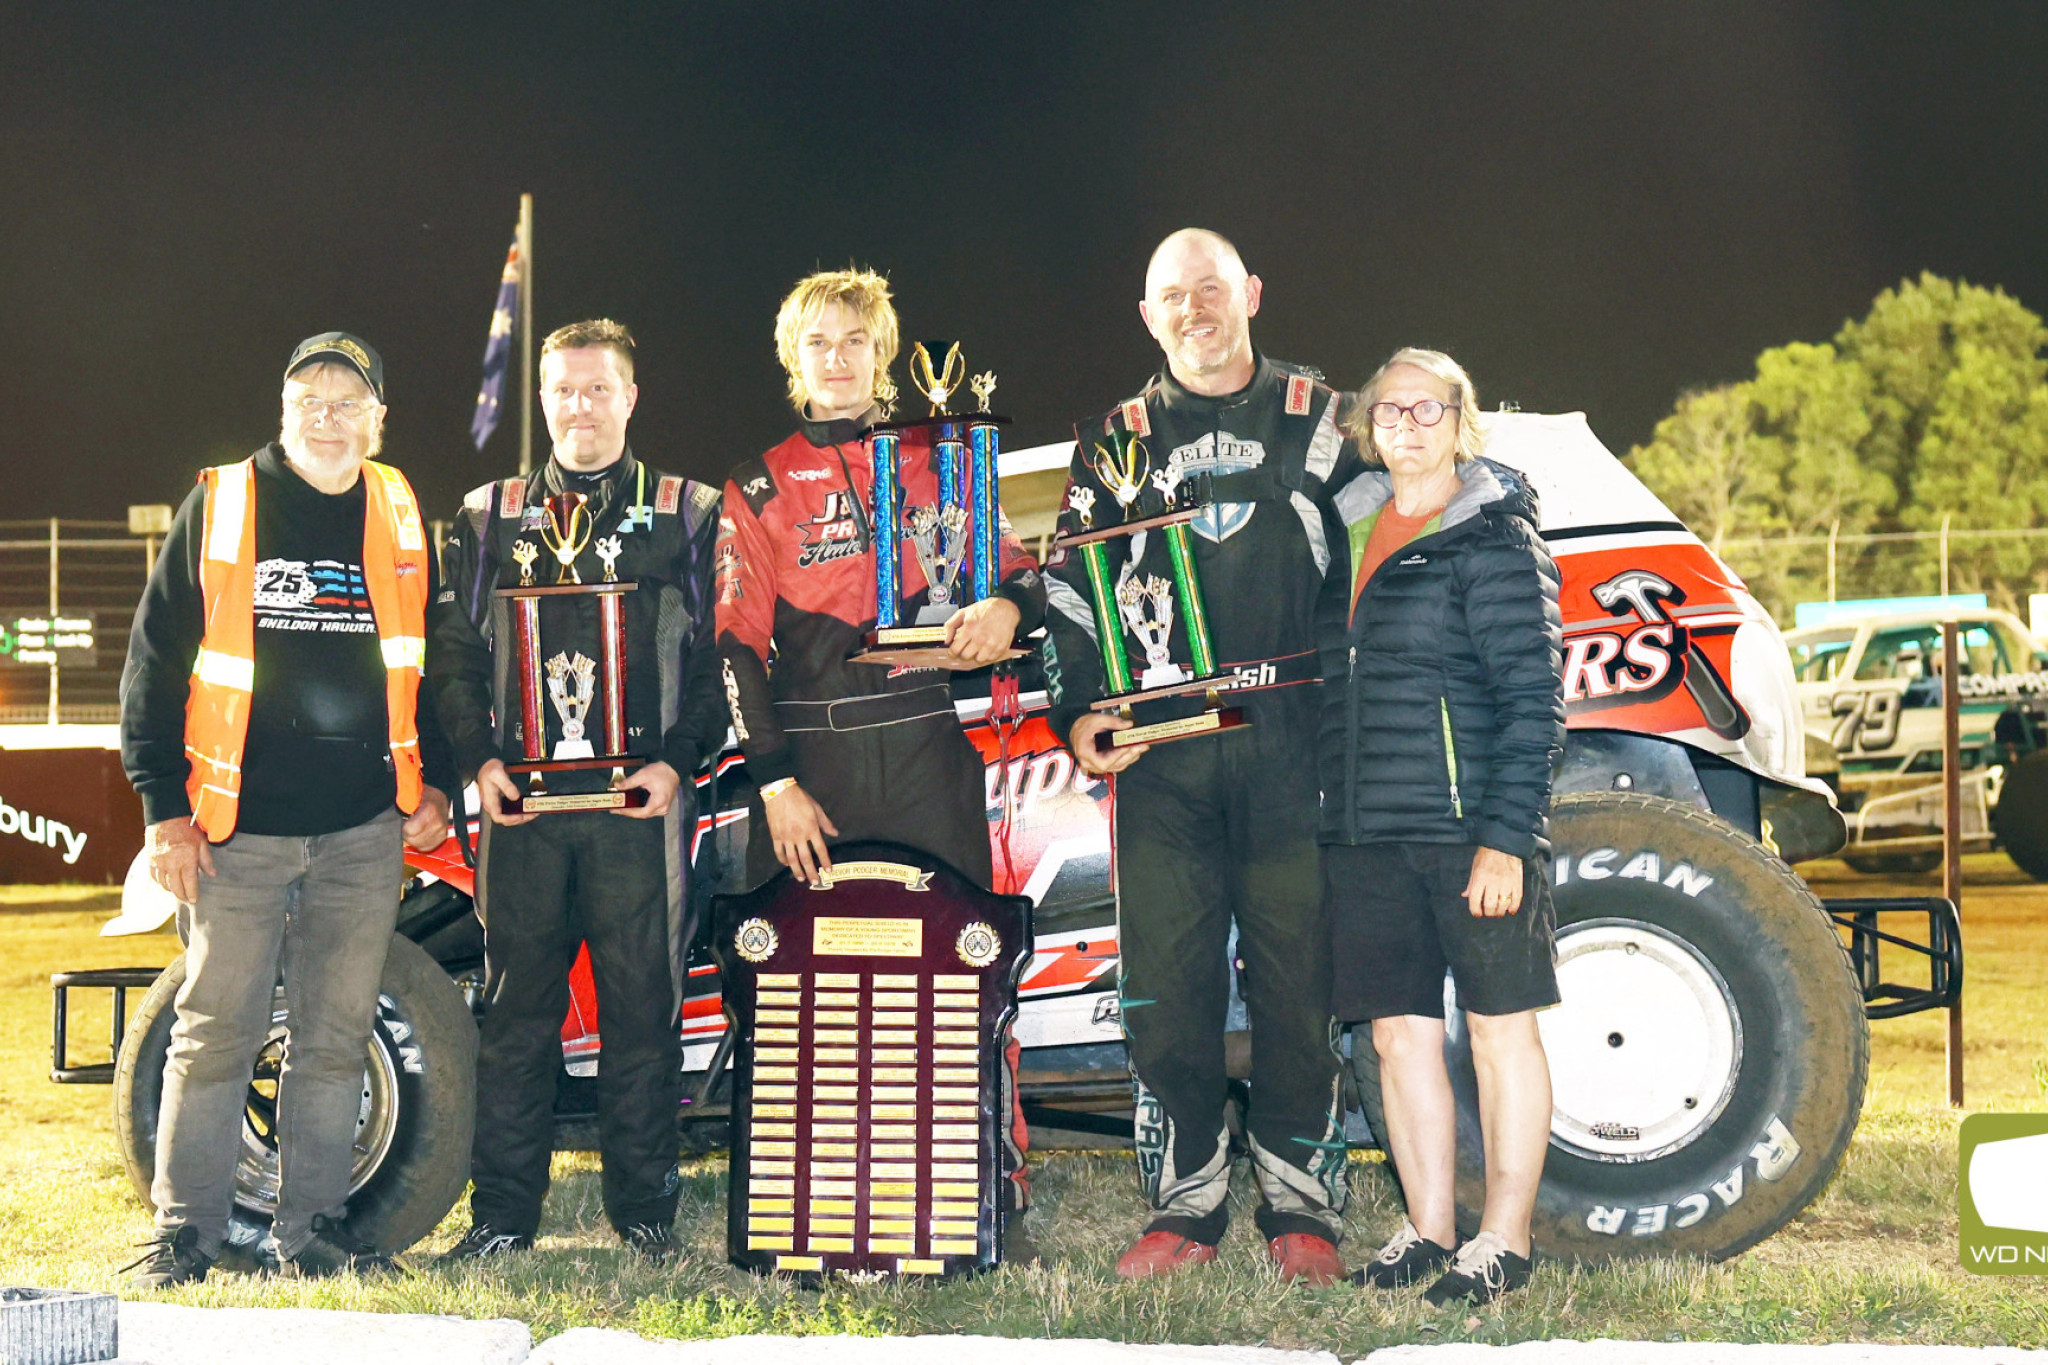 Neil Podger (left) and wife Lynda (right) with podium winners Jaimie May, Jacob Pitcher and Shaun Walsh.